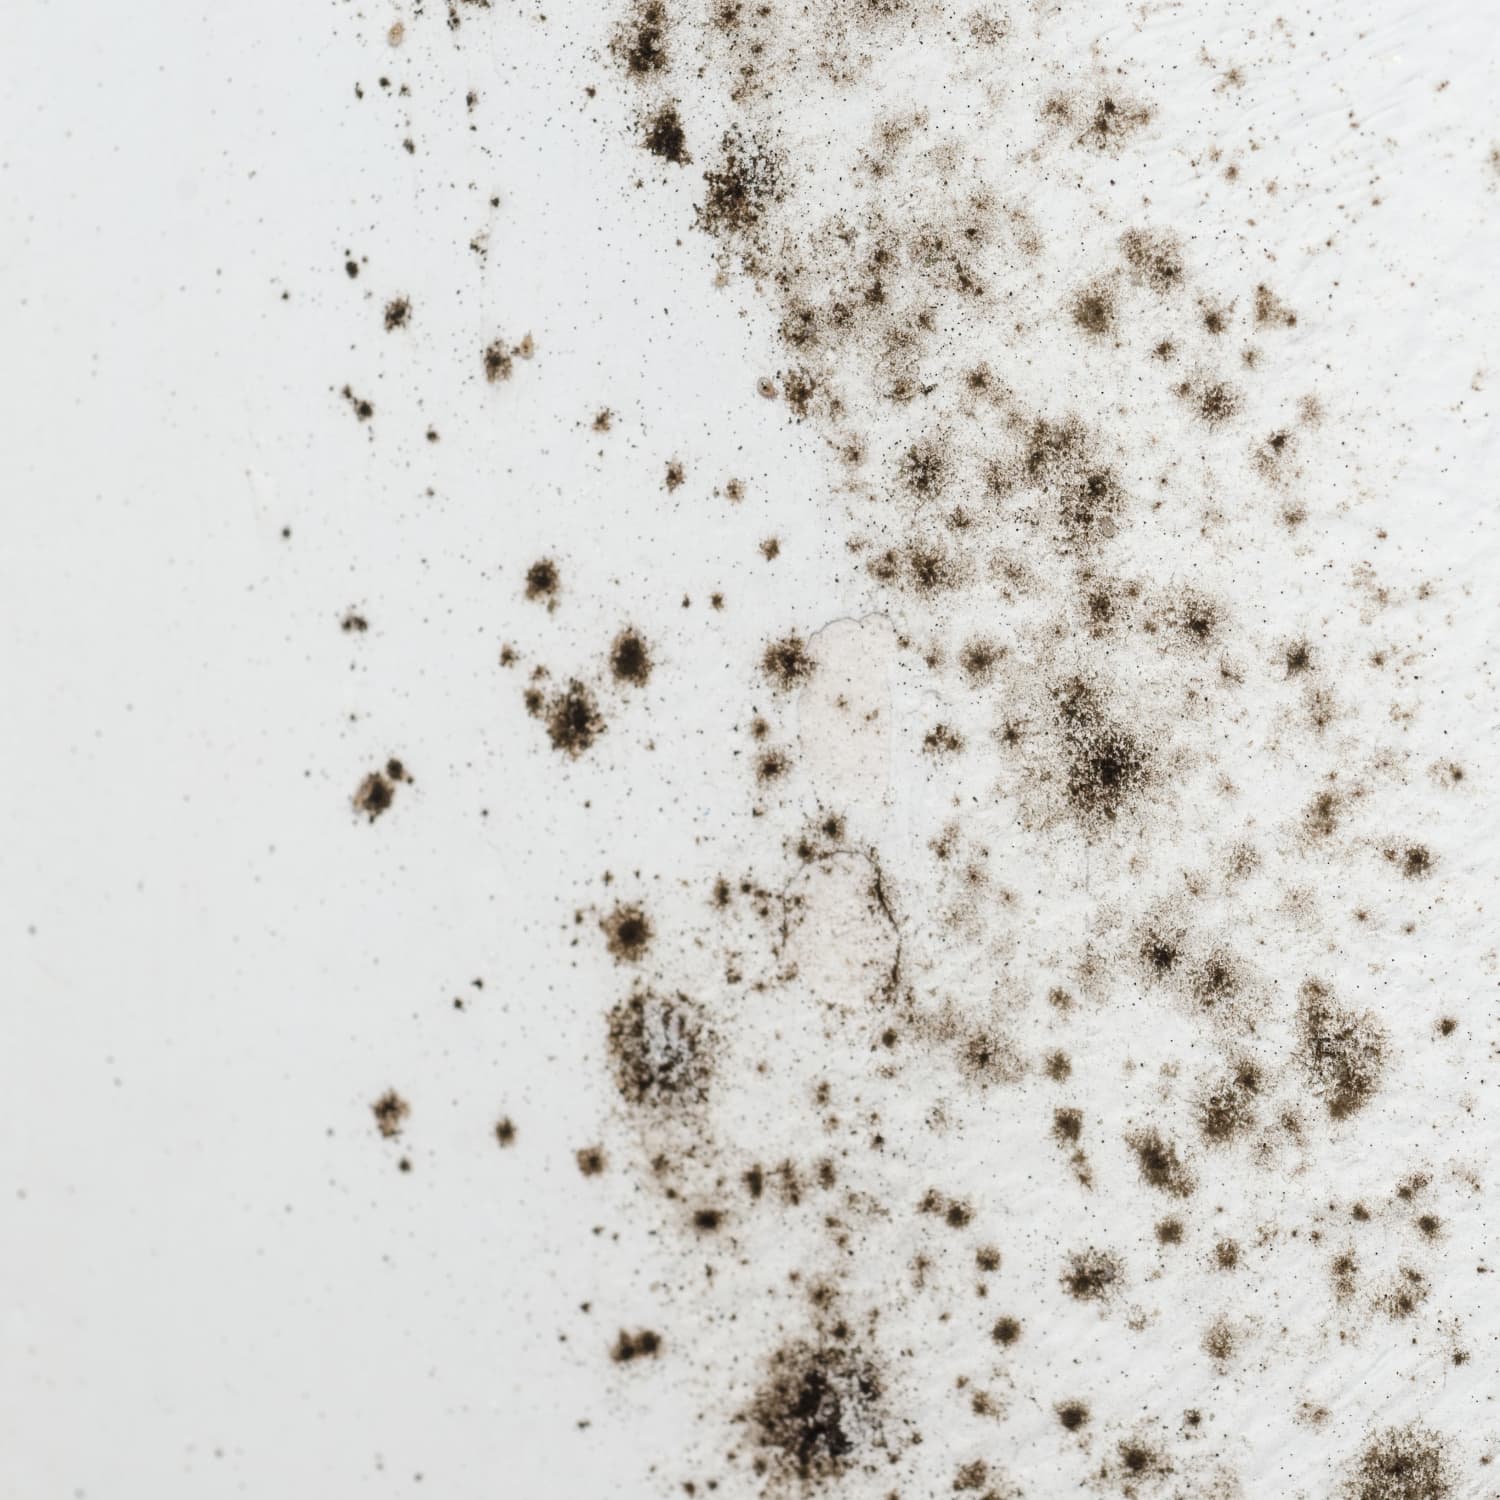 Is Mold Testing Necessary? How to Test Home for Black Mold